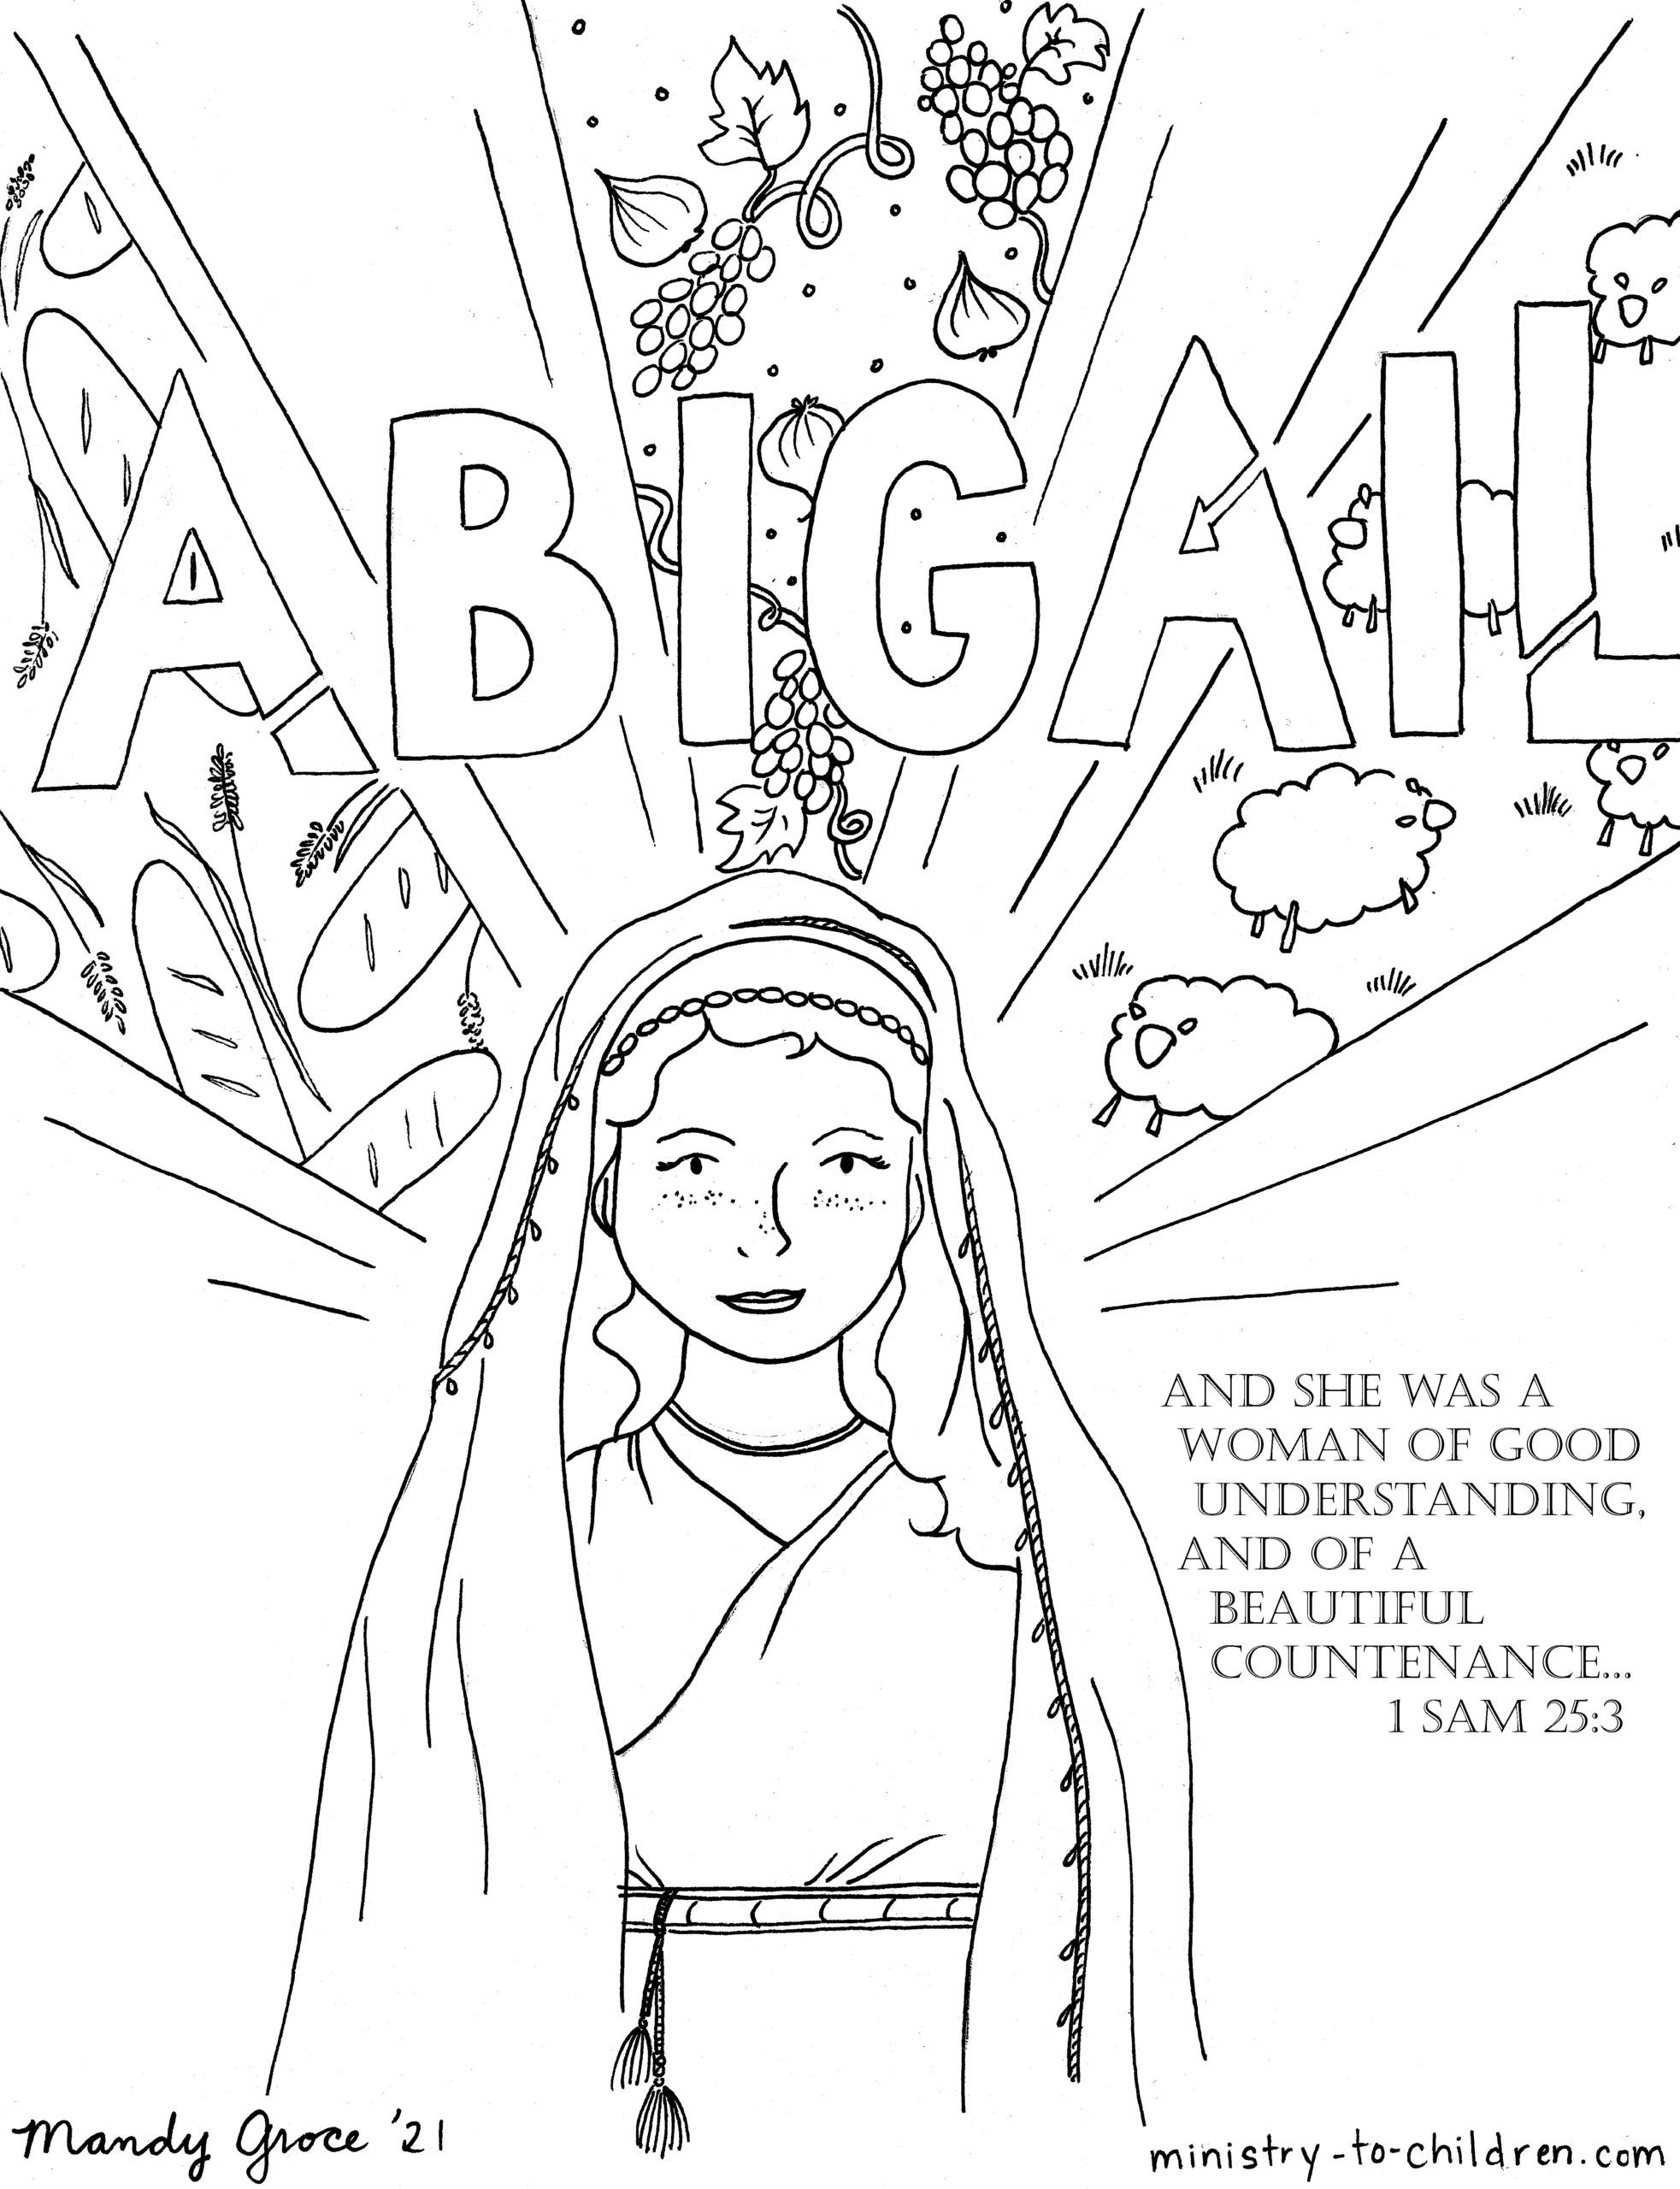 abigail-coloring-page-ministry-to-children-1-samuel-coloring-pages